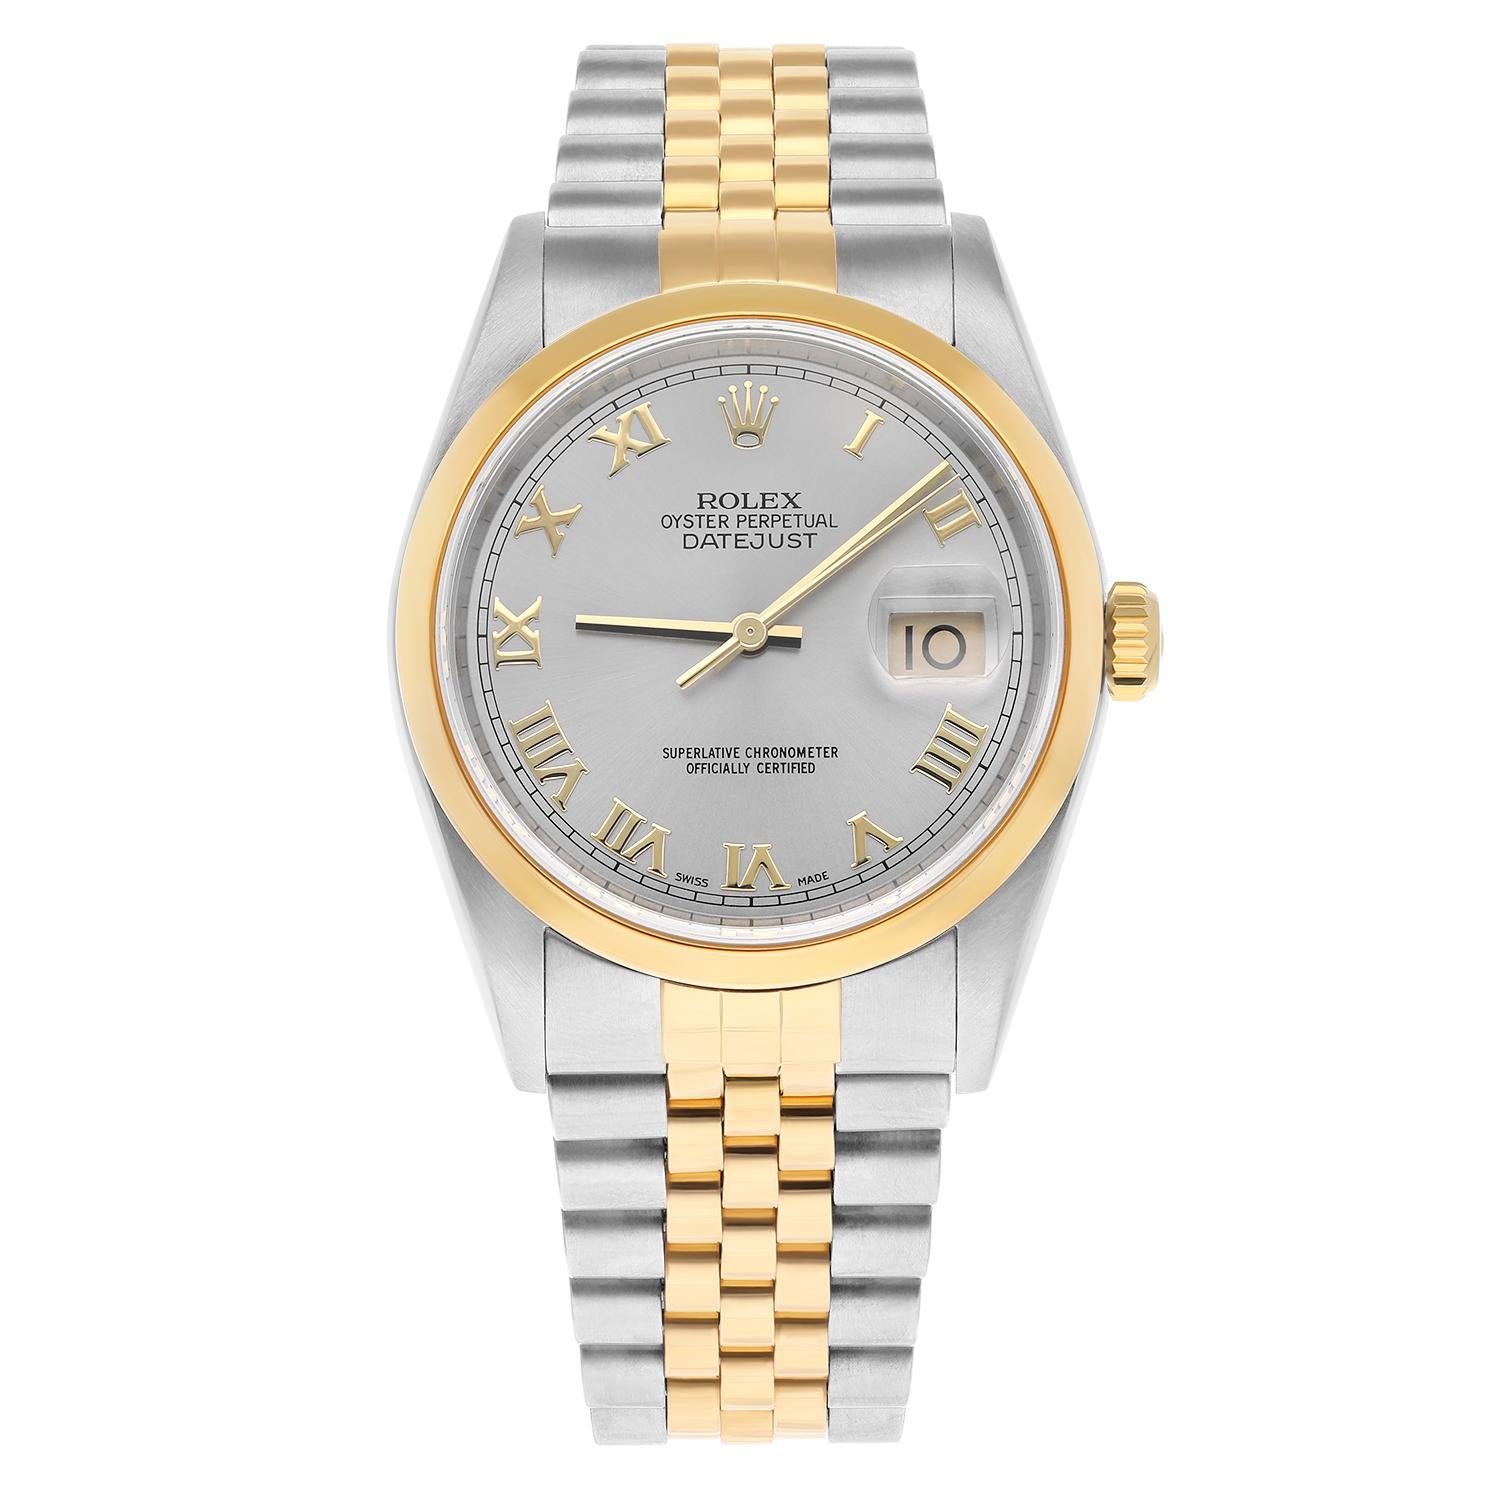 This watch has been professionally polished, serviced and is in excellent overall condition. There are absolutely no visible scratches or blemishes. This model, complete and in impeccable condition is a very rare finding!

The sale comes with a